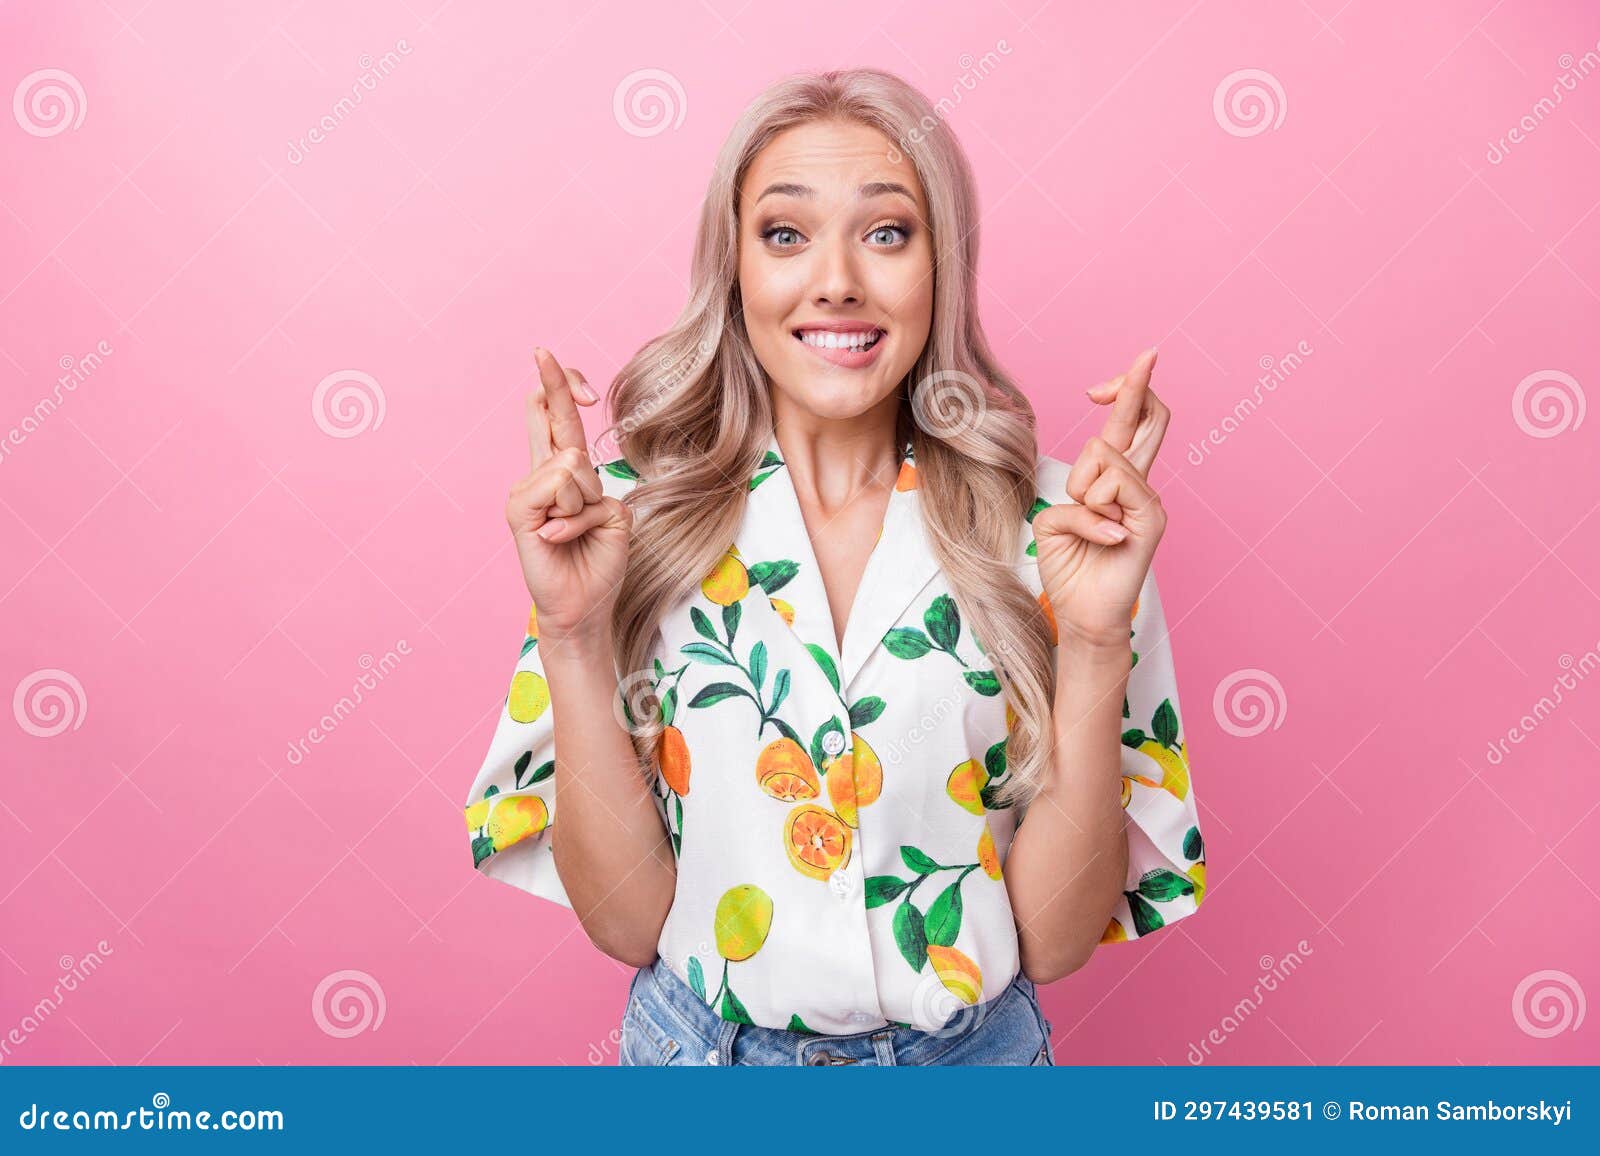 9. Wavy Blonde Hair Man Stock Photos, Pictures & Royalty-Free Images - iStock - wide 11